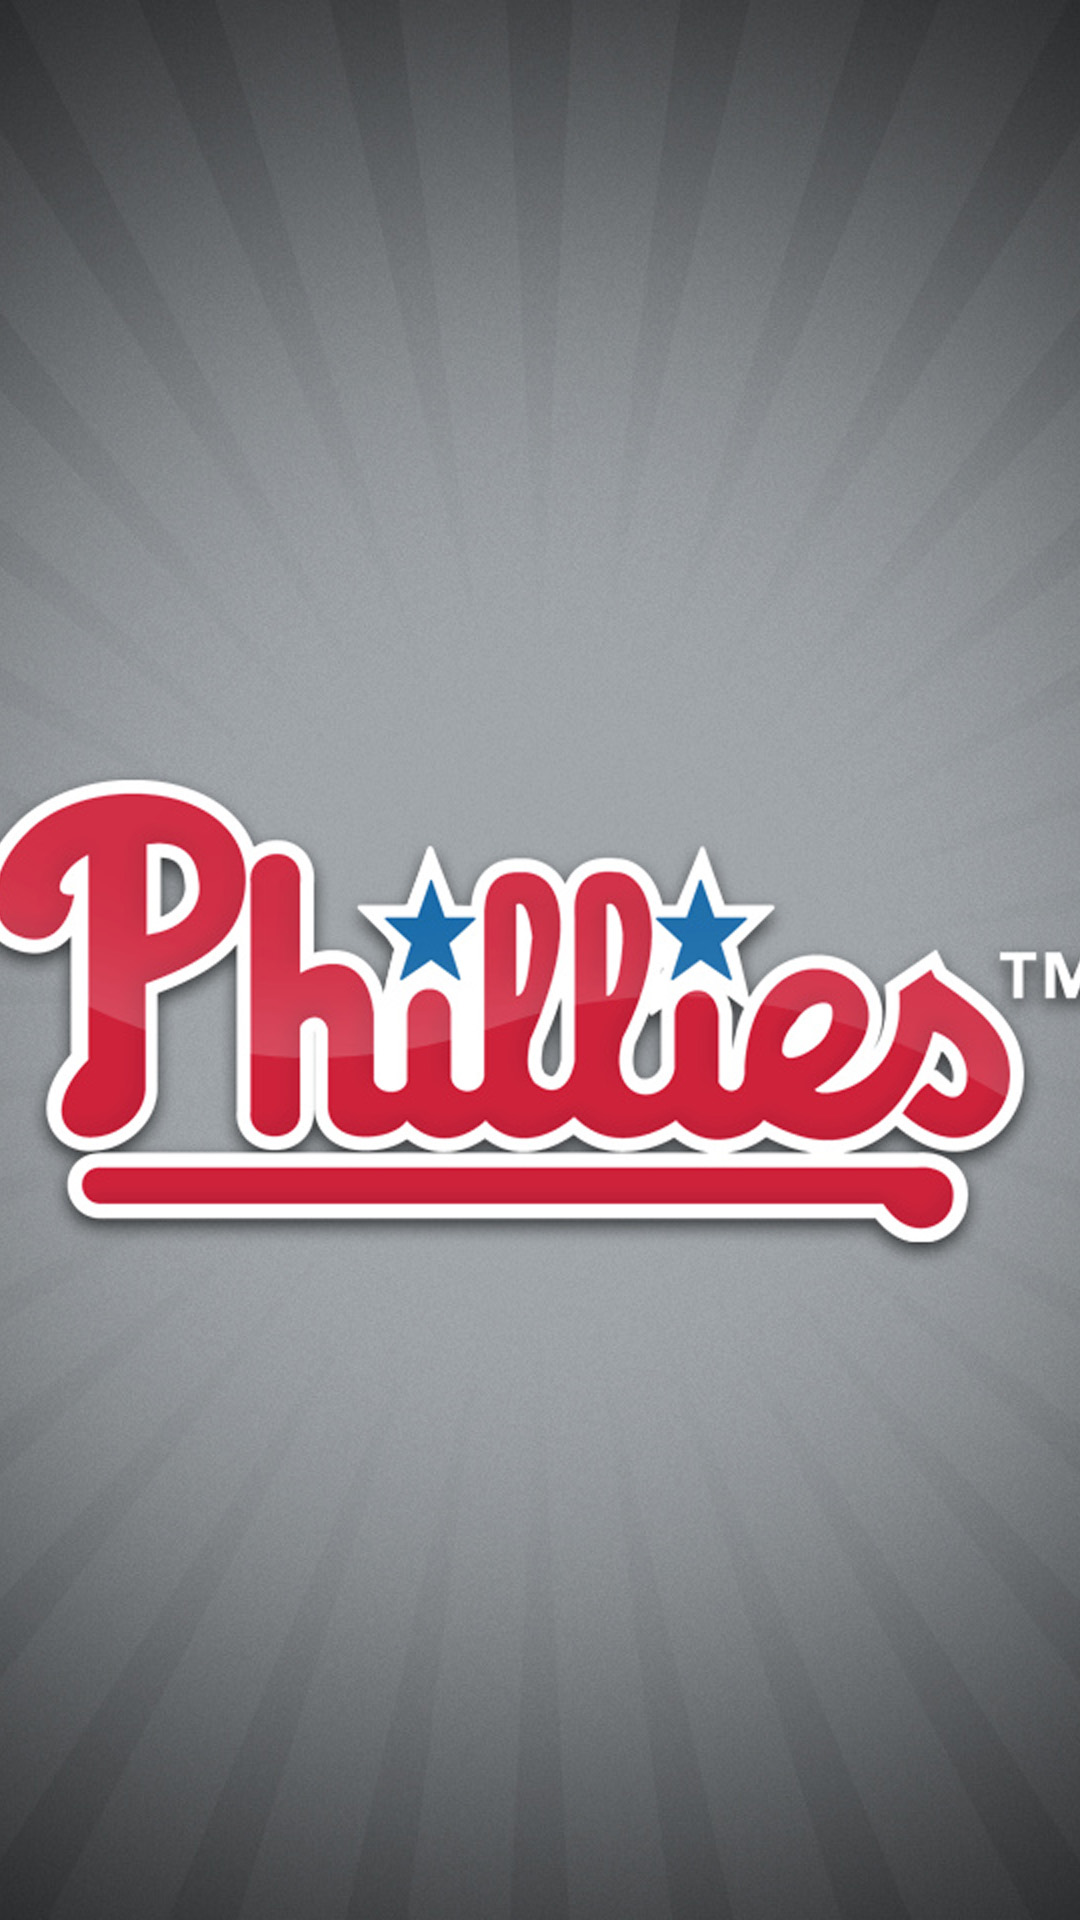 Phillies Wallpaper For Galaxy S5